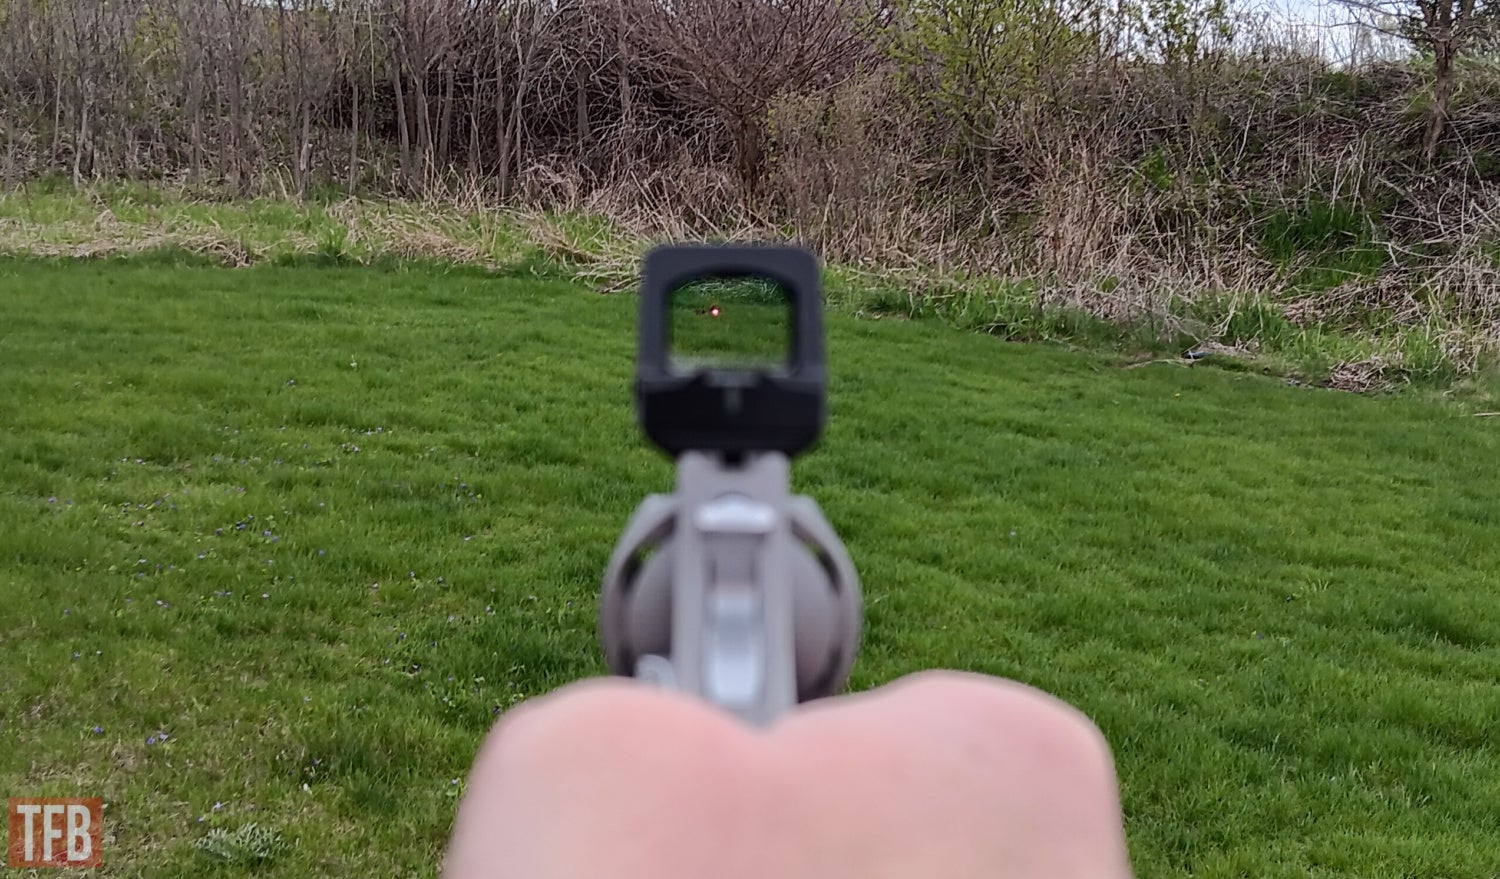 Meprolight MPO-S Micro Red Dot Sight Review